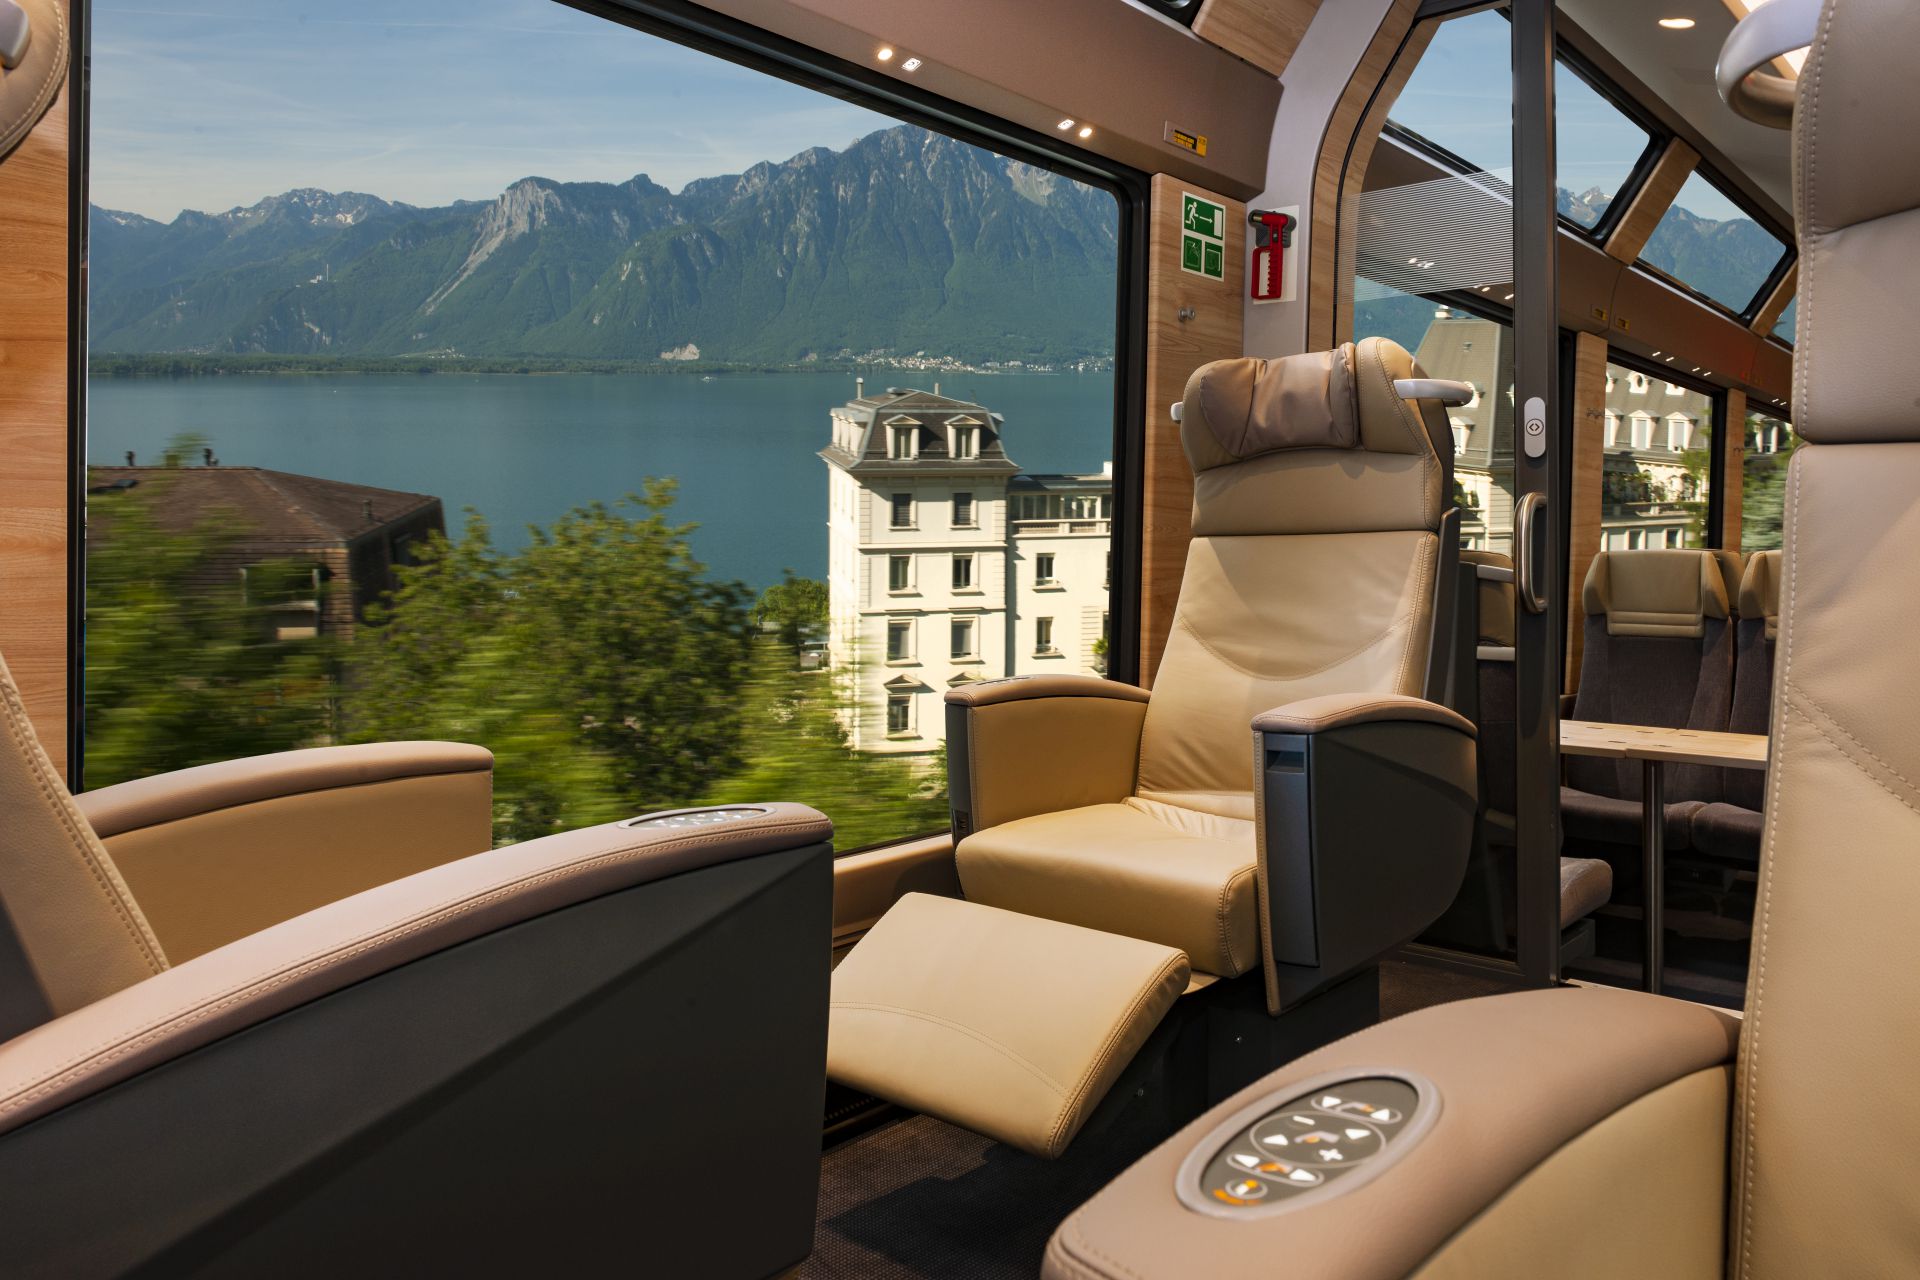 Connectivity and infotainment solution to be delivered to Goldenpass Express